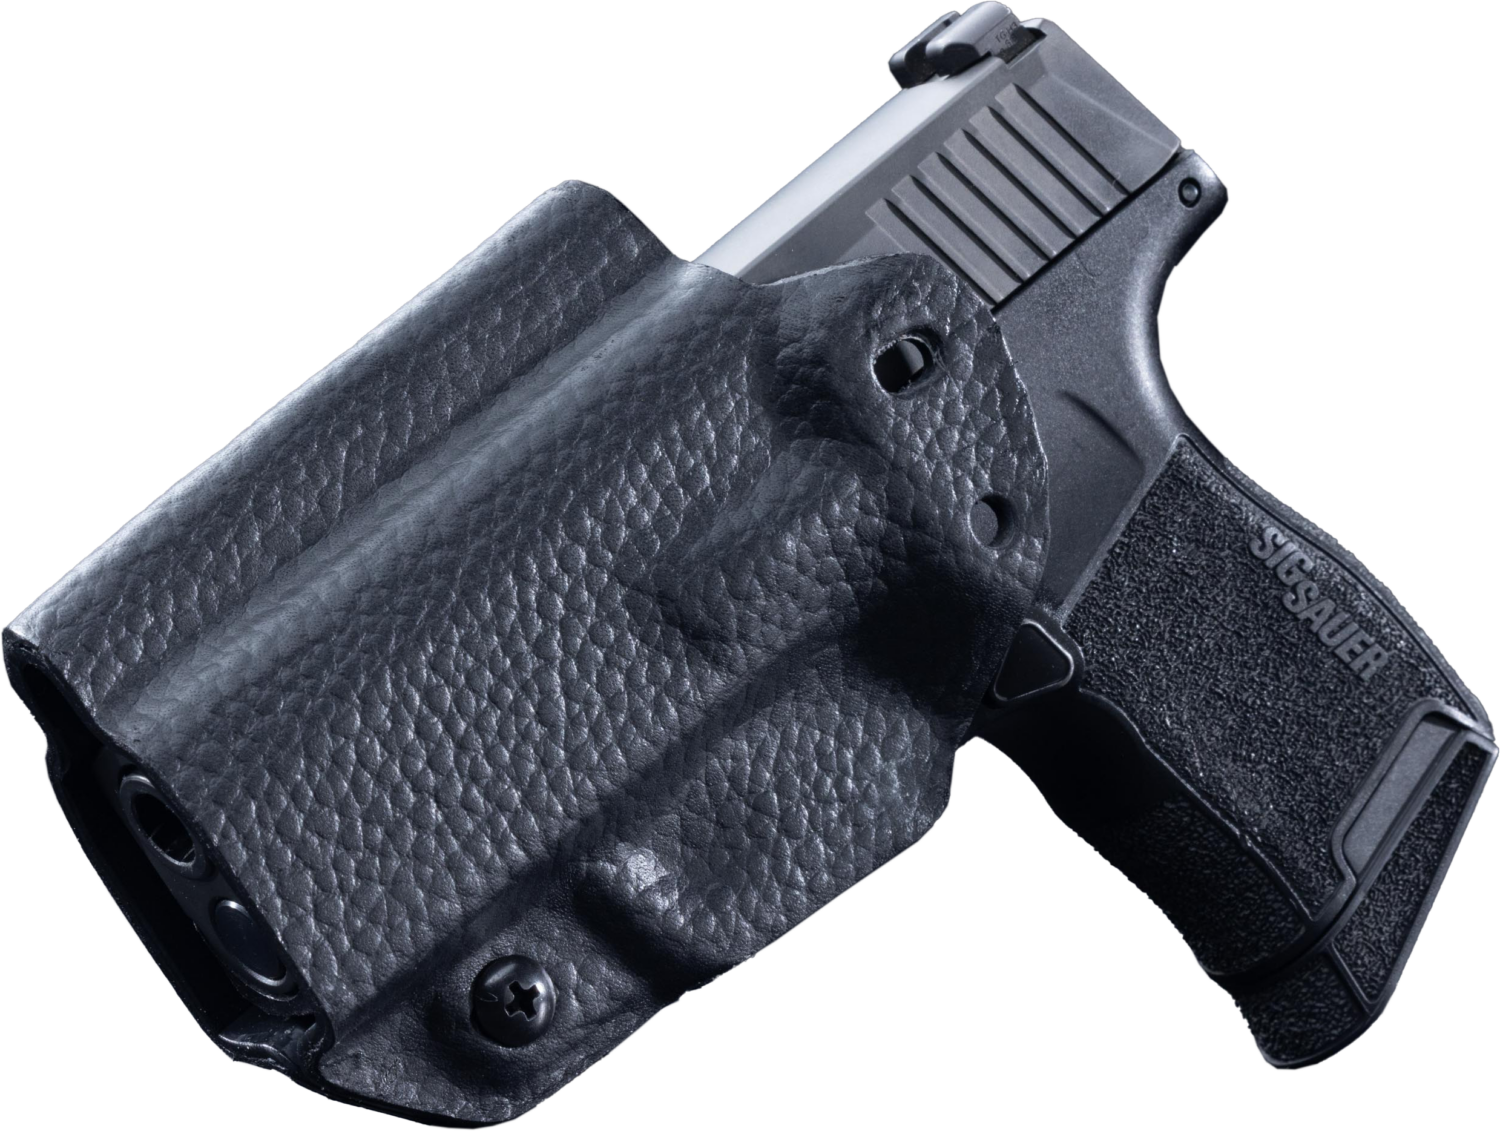 New Hybrid Black Leather Holsters from Mission First Tactical